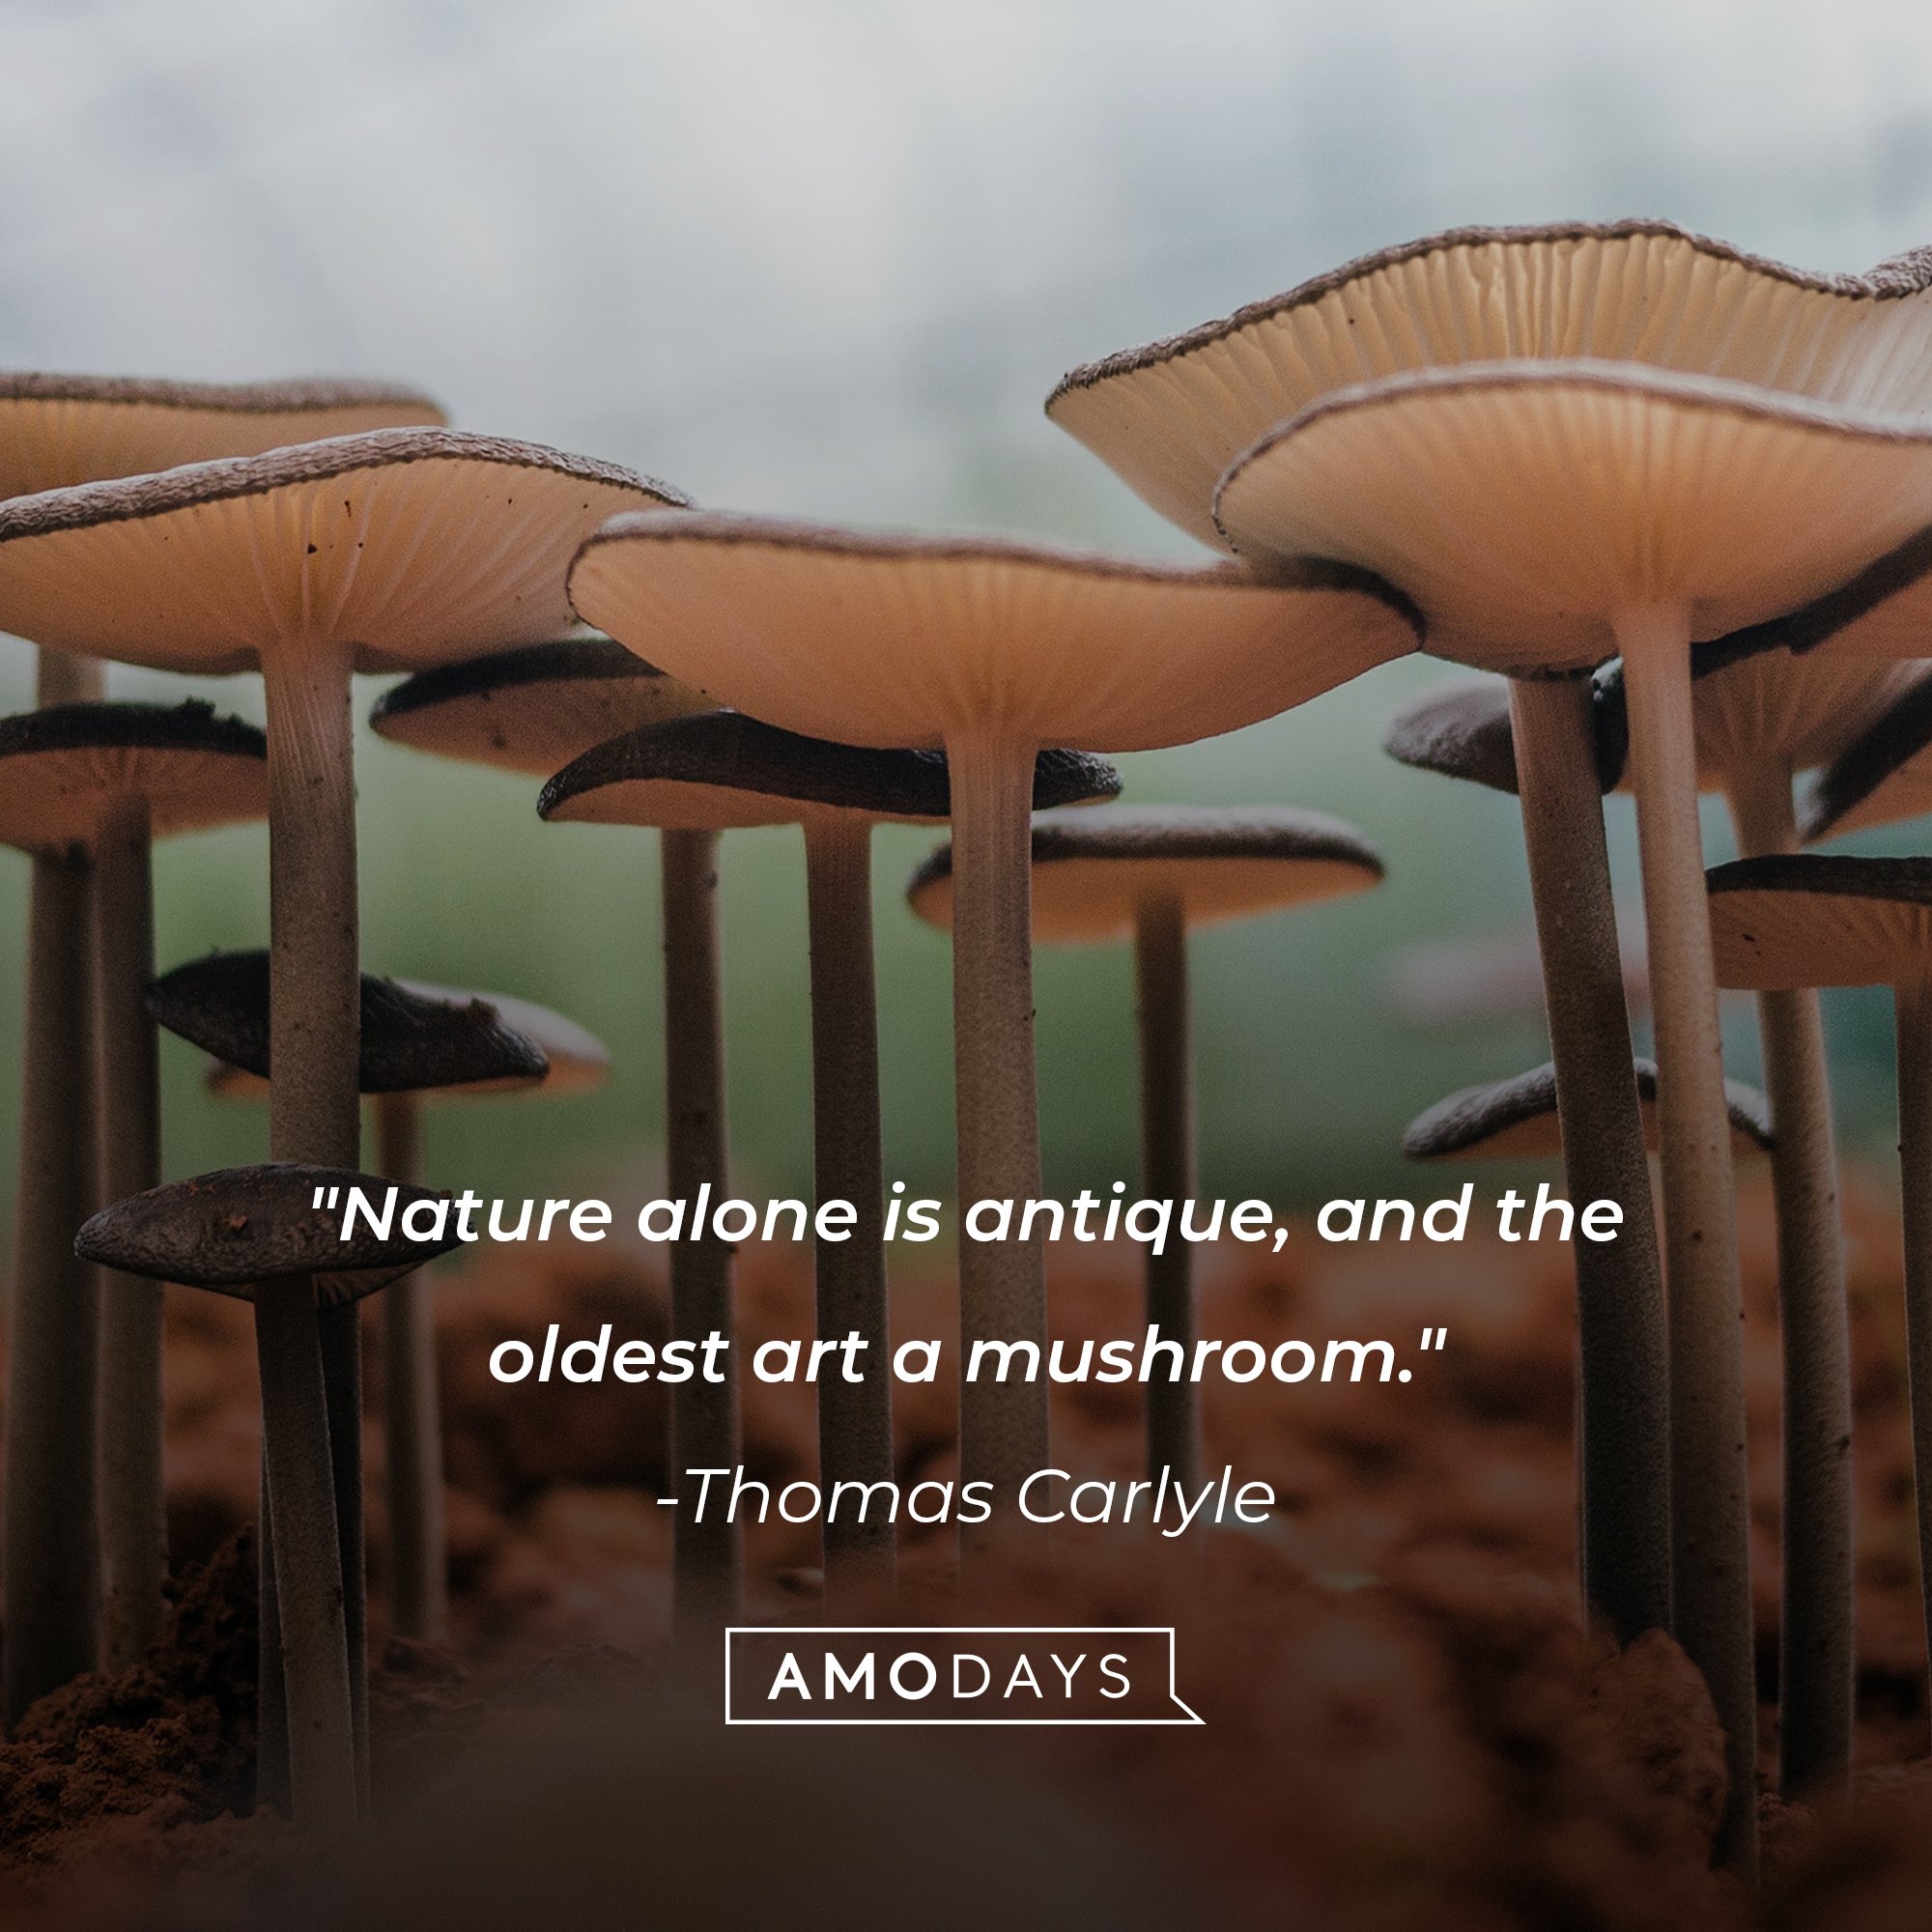 Thomas Carlyle’s quote: "Nature alone is antique, and the oldest art a mushroom." | Image: AmoDays